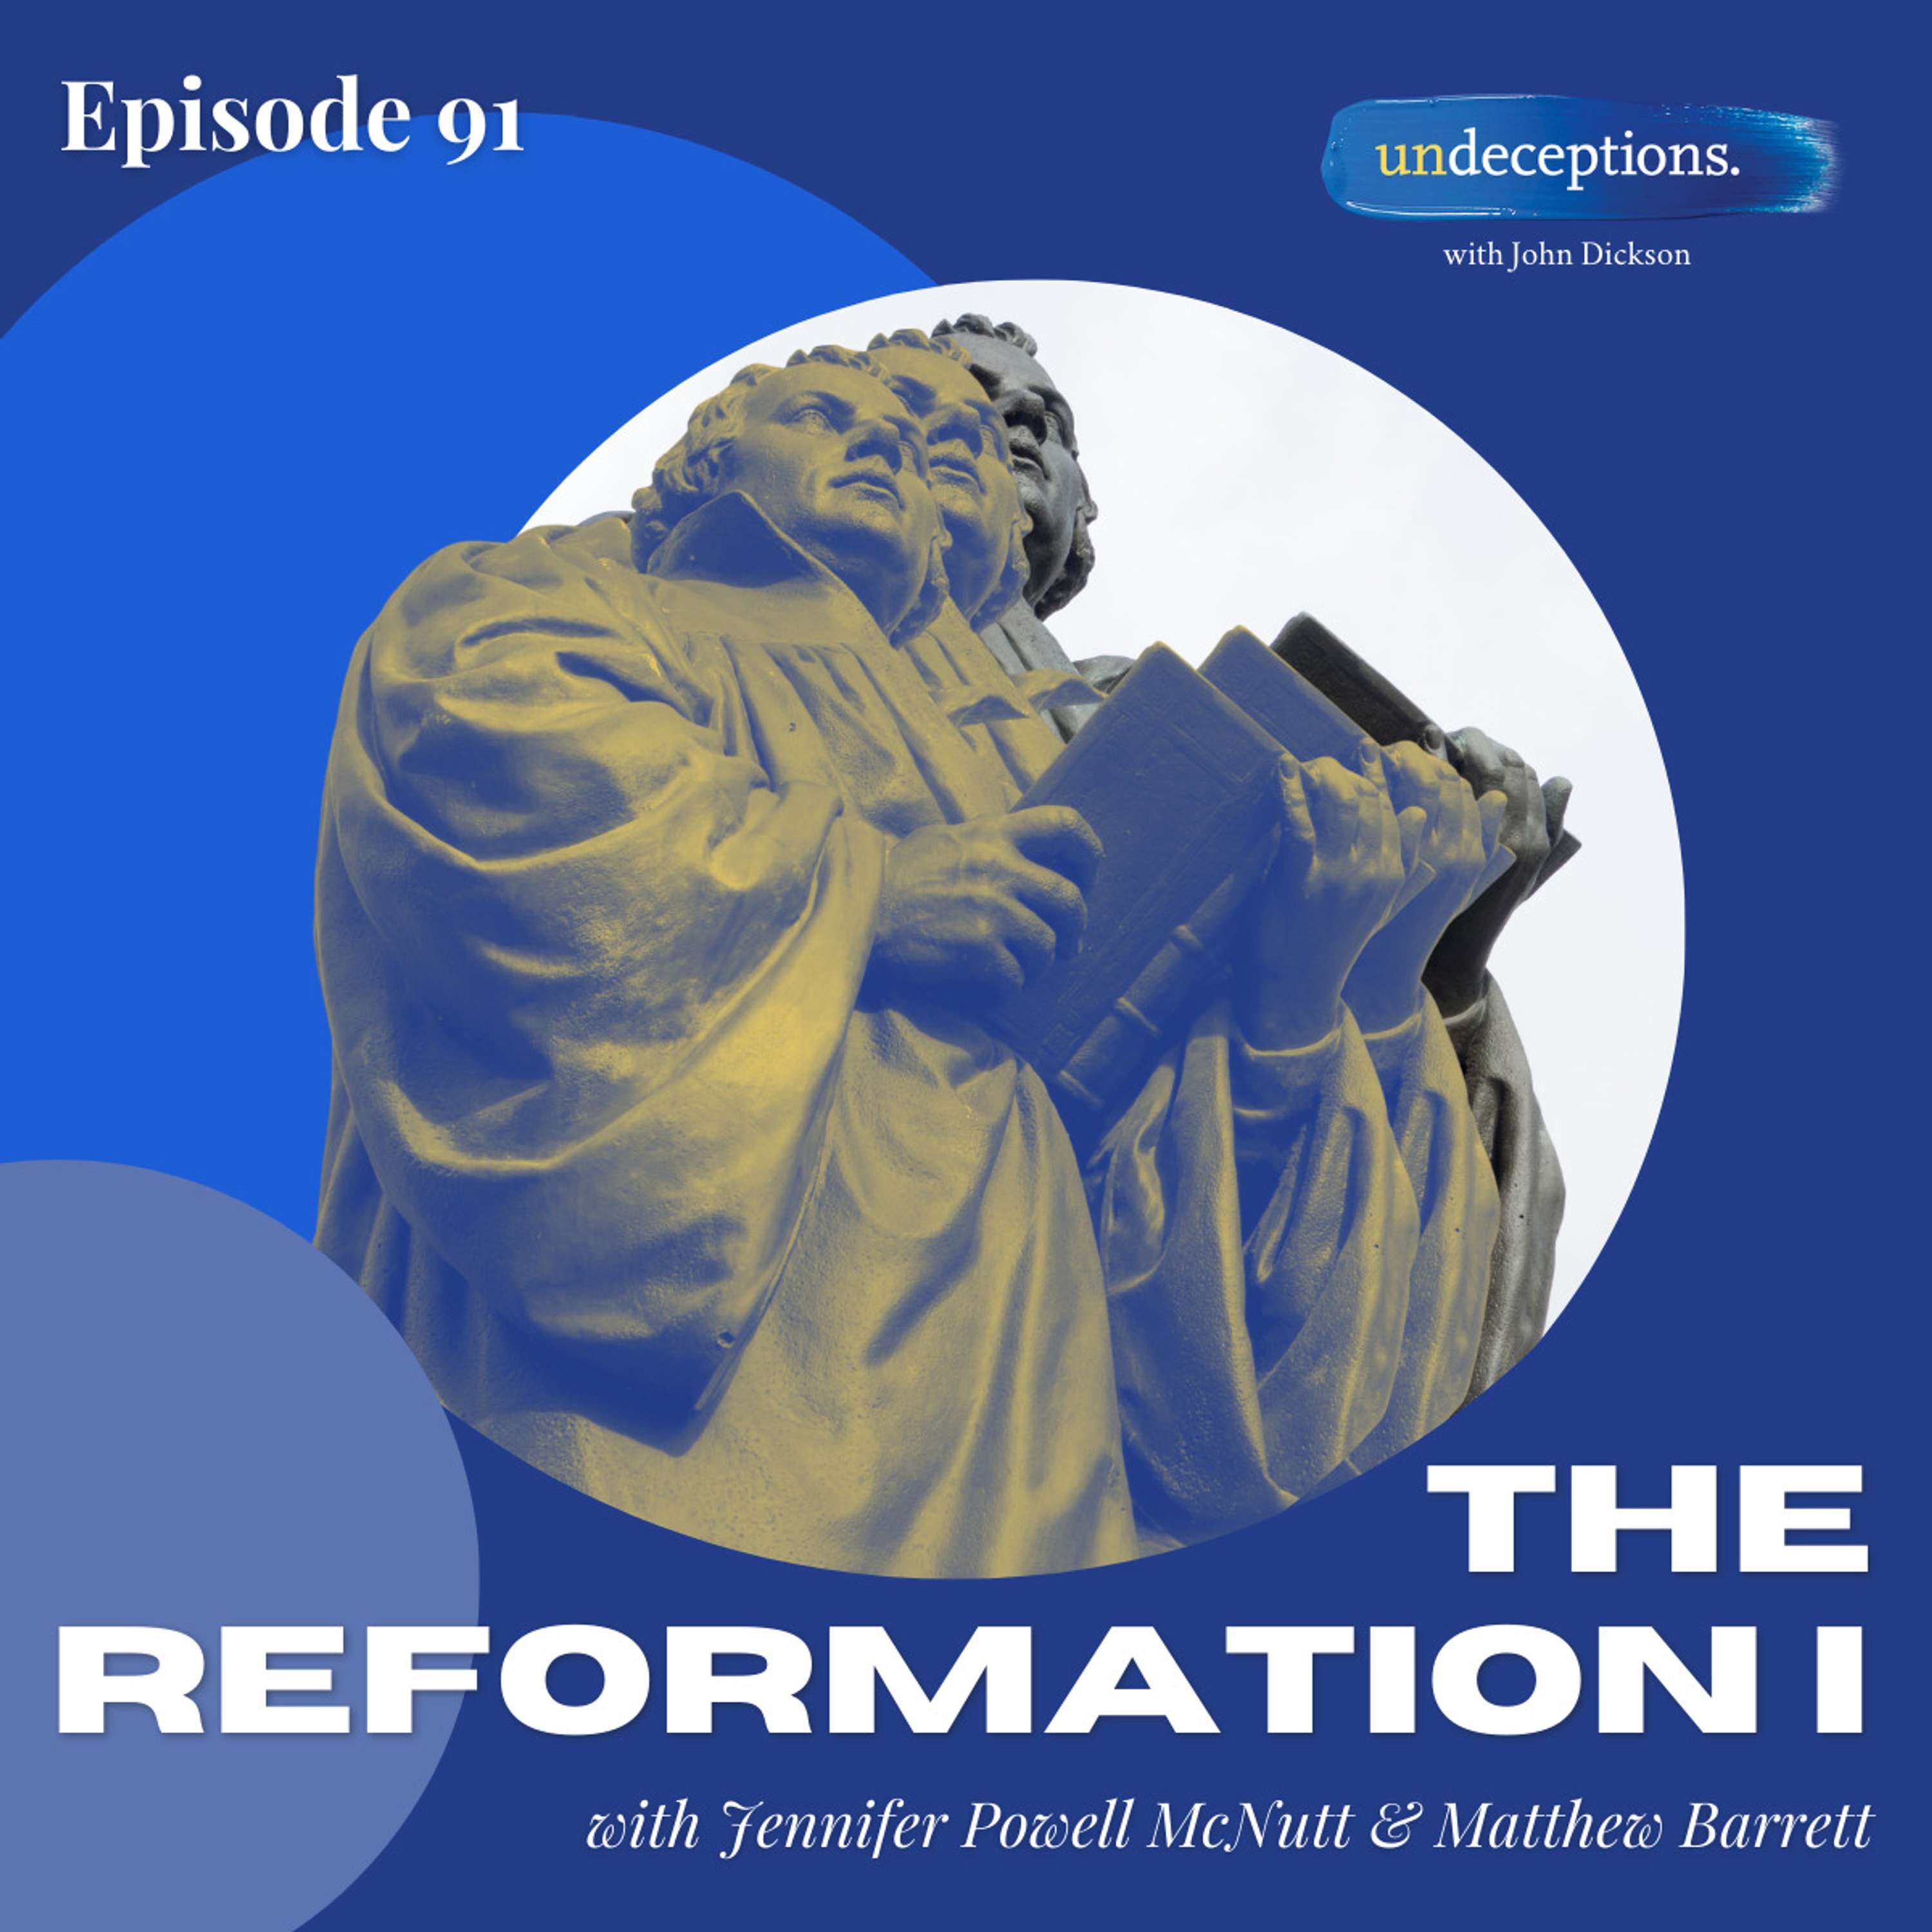 The Reformation I